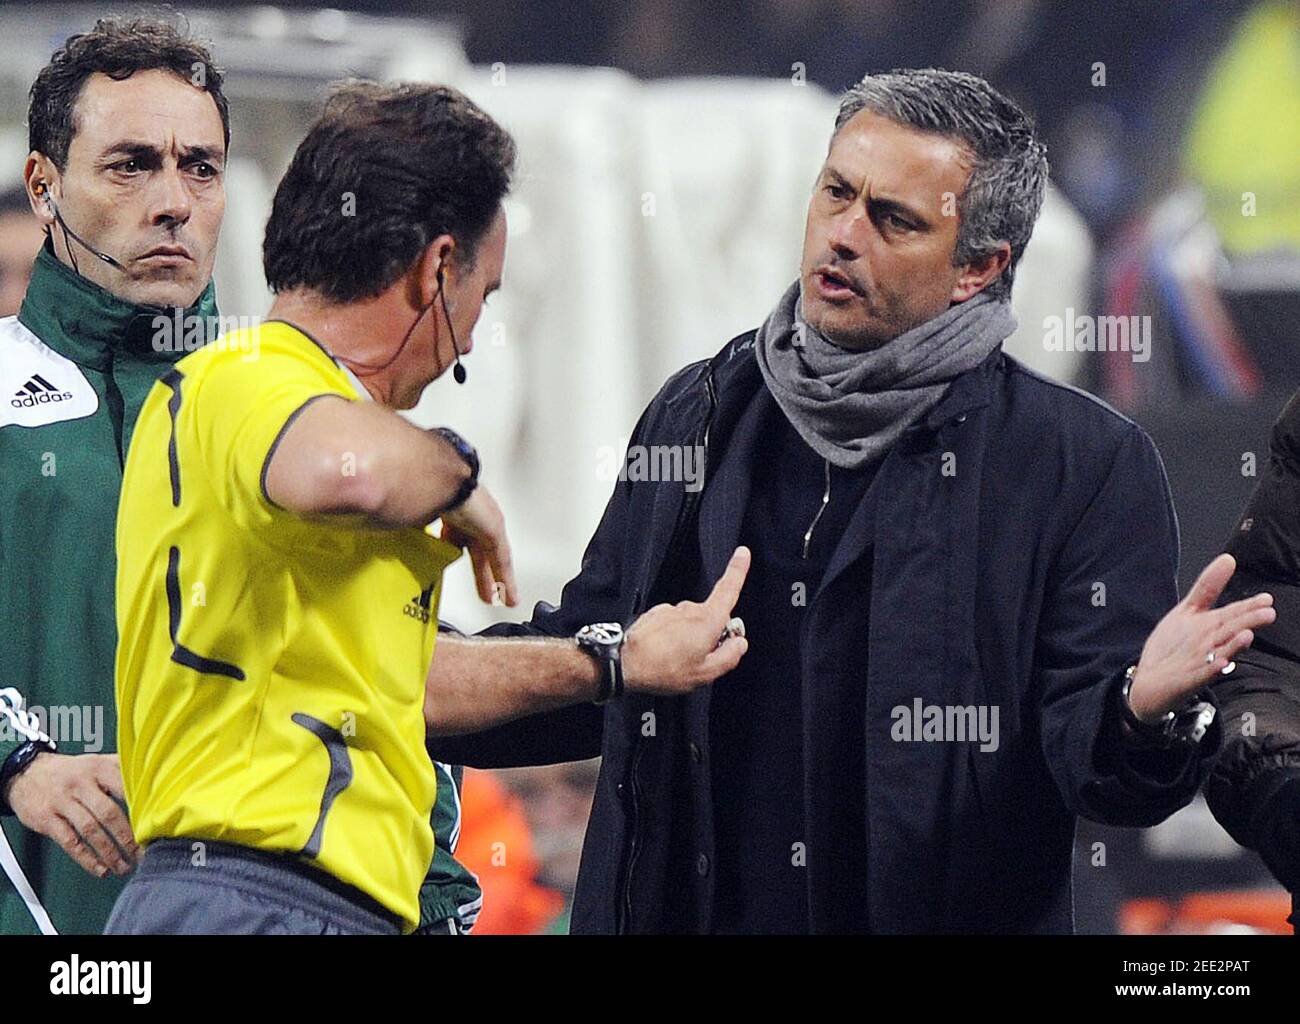 Football - Inter Milan v Manchester United UEFA Champions League Second  Round First Leg - San Siro Stadium, Milan - 24/2/09 Inter Milan manager Jose  Mourinho (R) argues with Referee Alfonso Perez